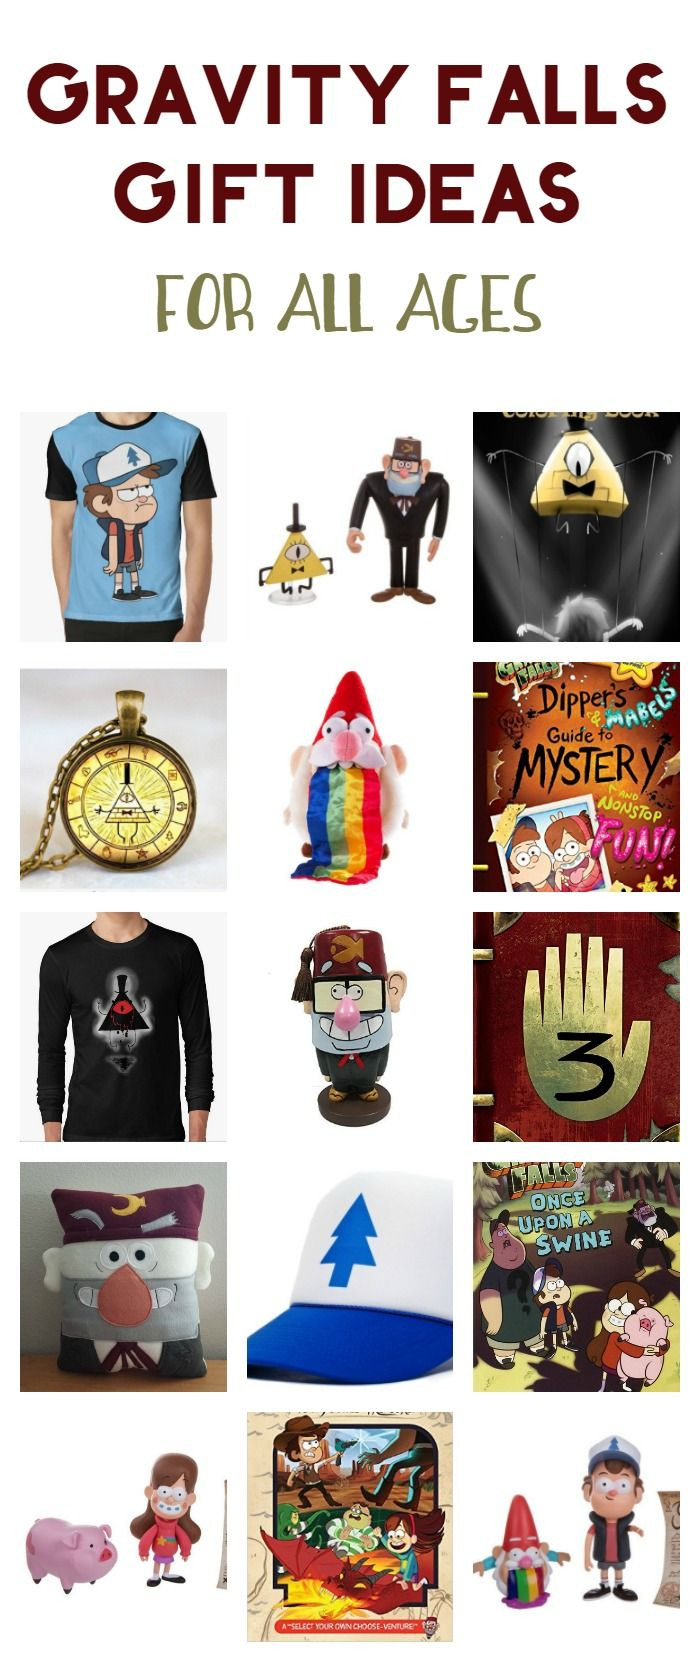 Fall Gifts For Her
 20 Gift Ideas for Your Gravity Falls Obsessed Kids